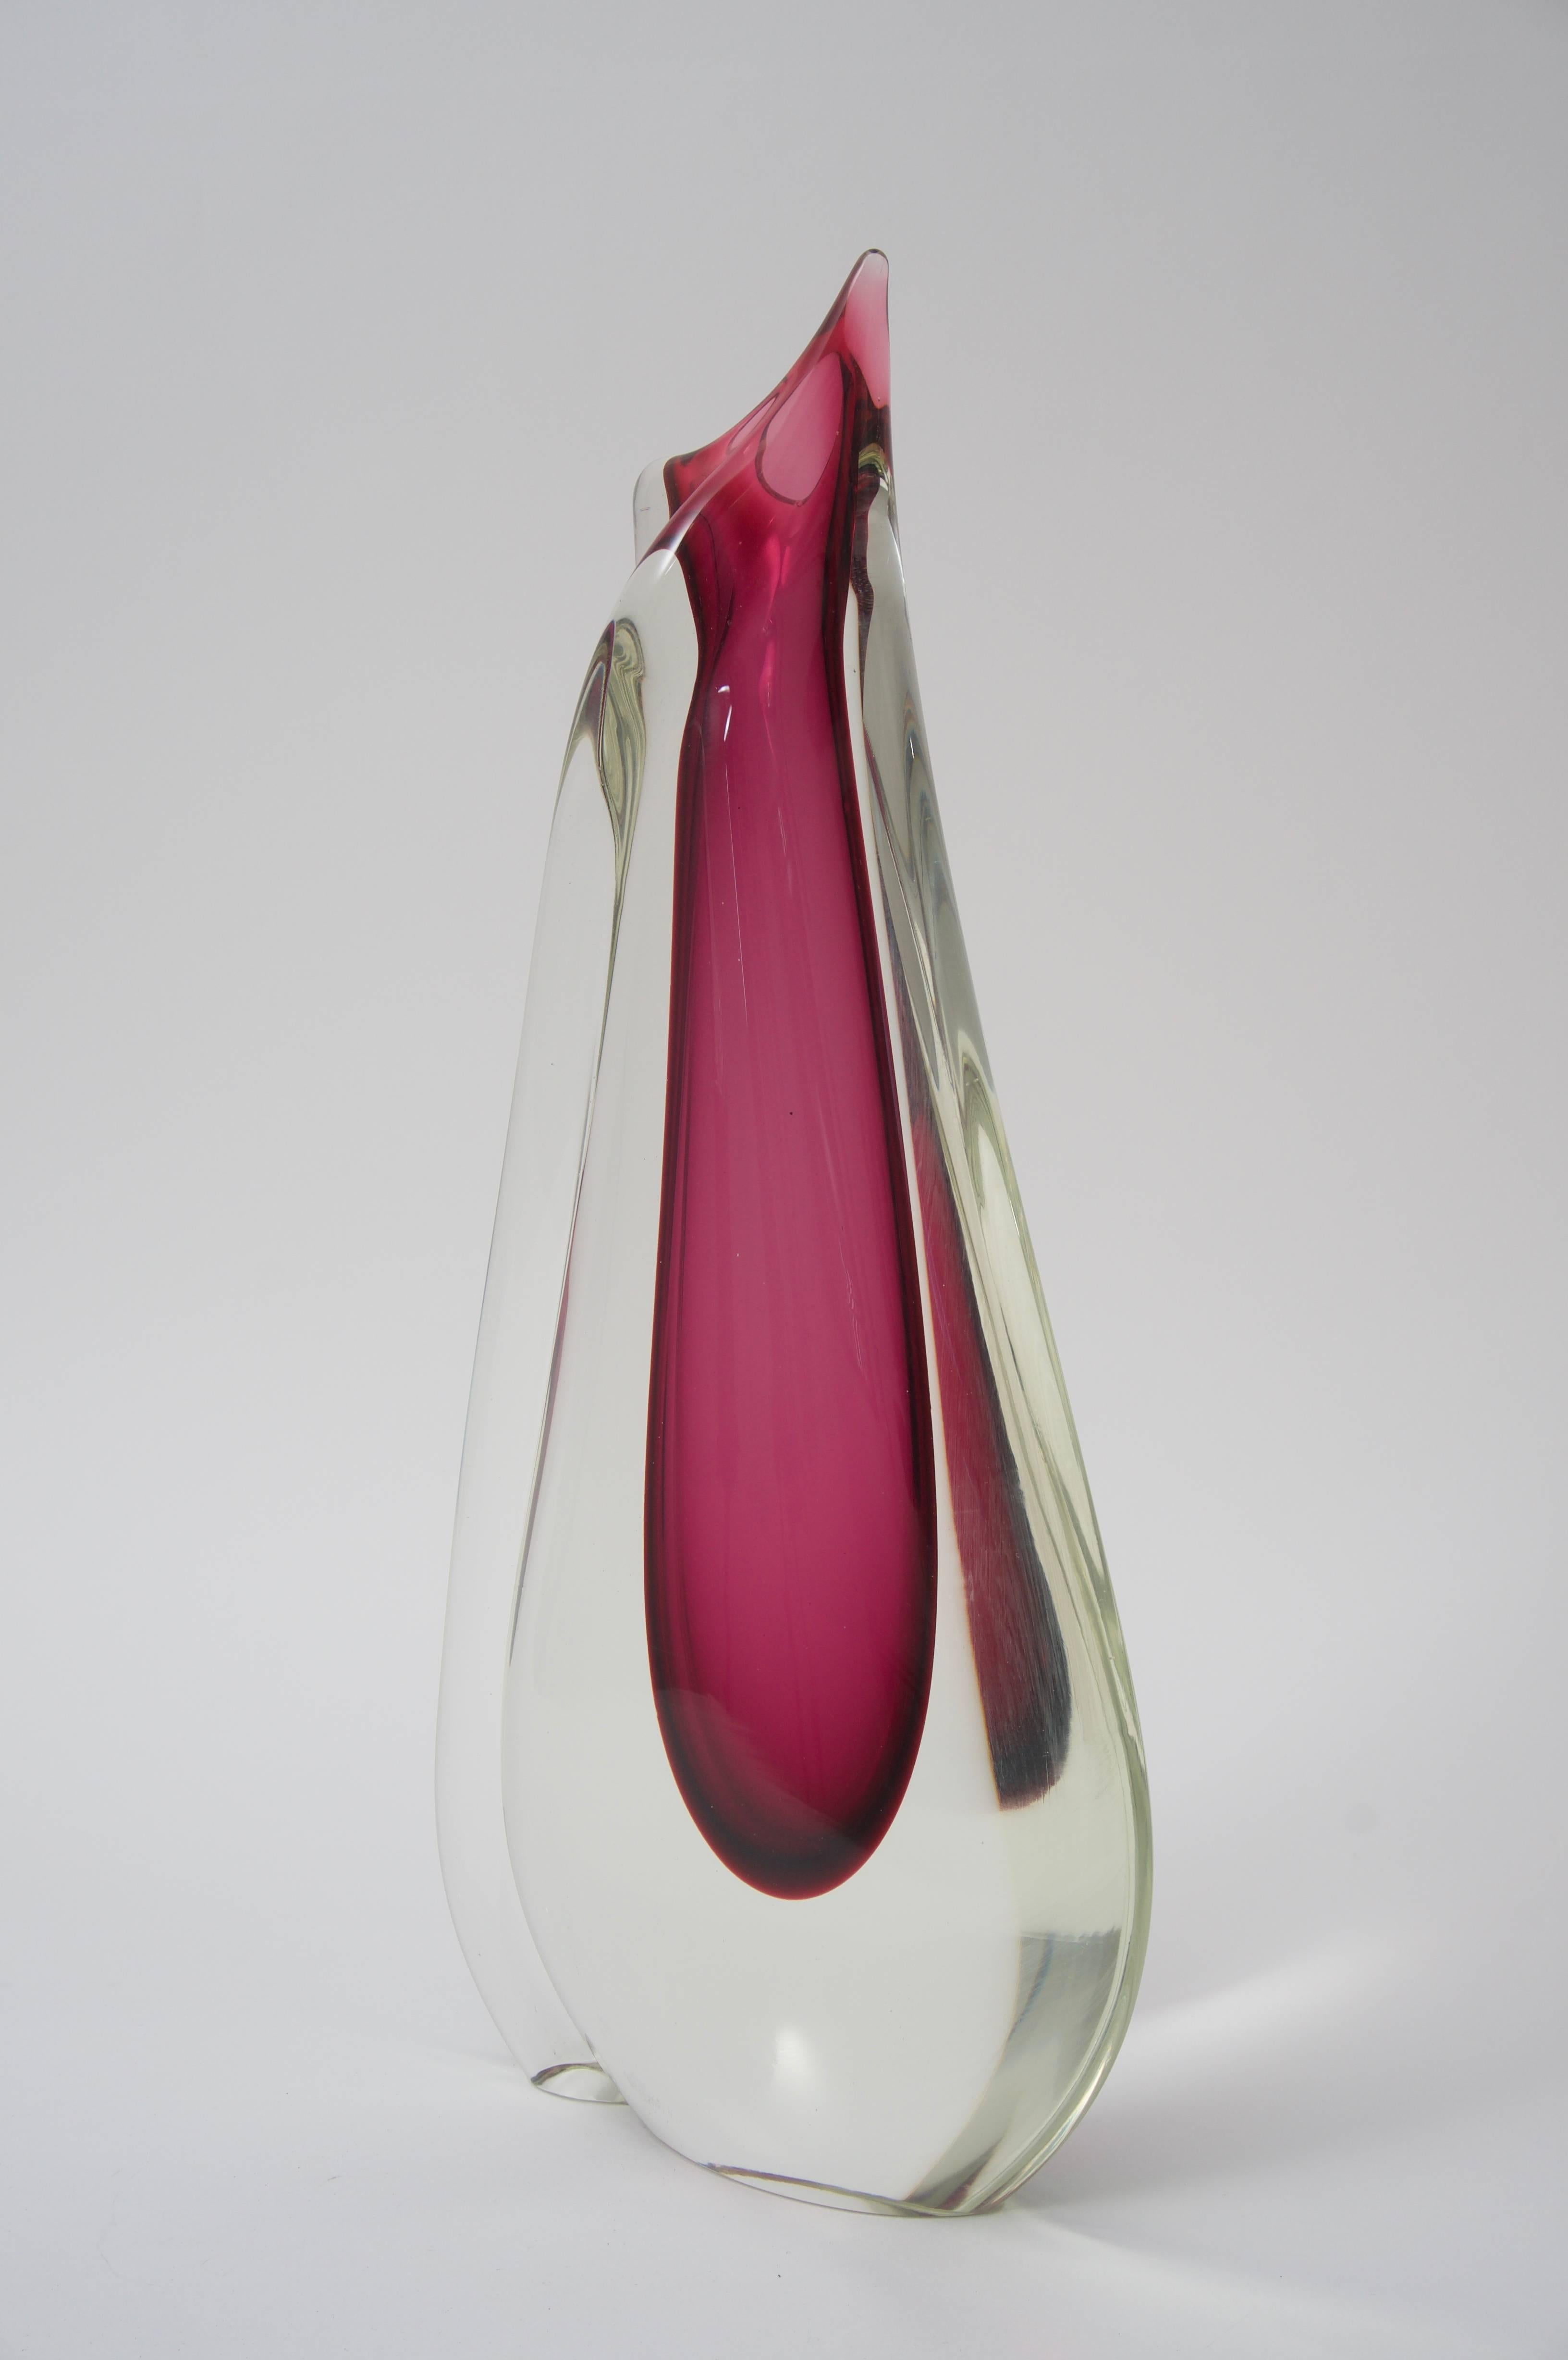 This large-scale Murano glass vase was designed by Flavio Poli for Seguso in Venice. The piece was acquired from a Palm Beach estate dates to the mid-20th century.